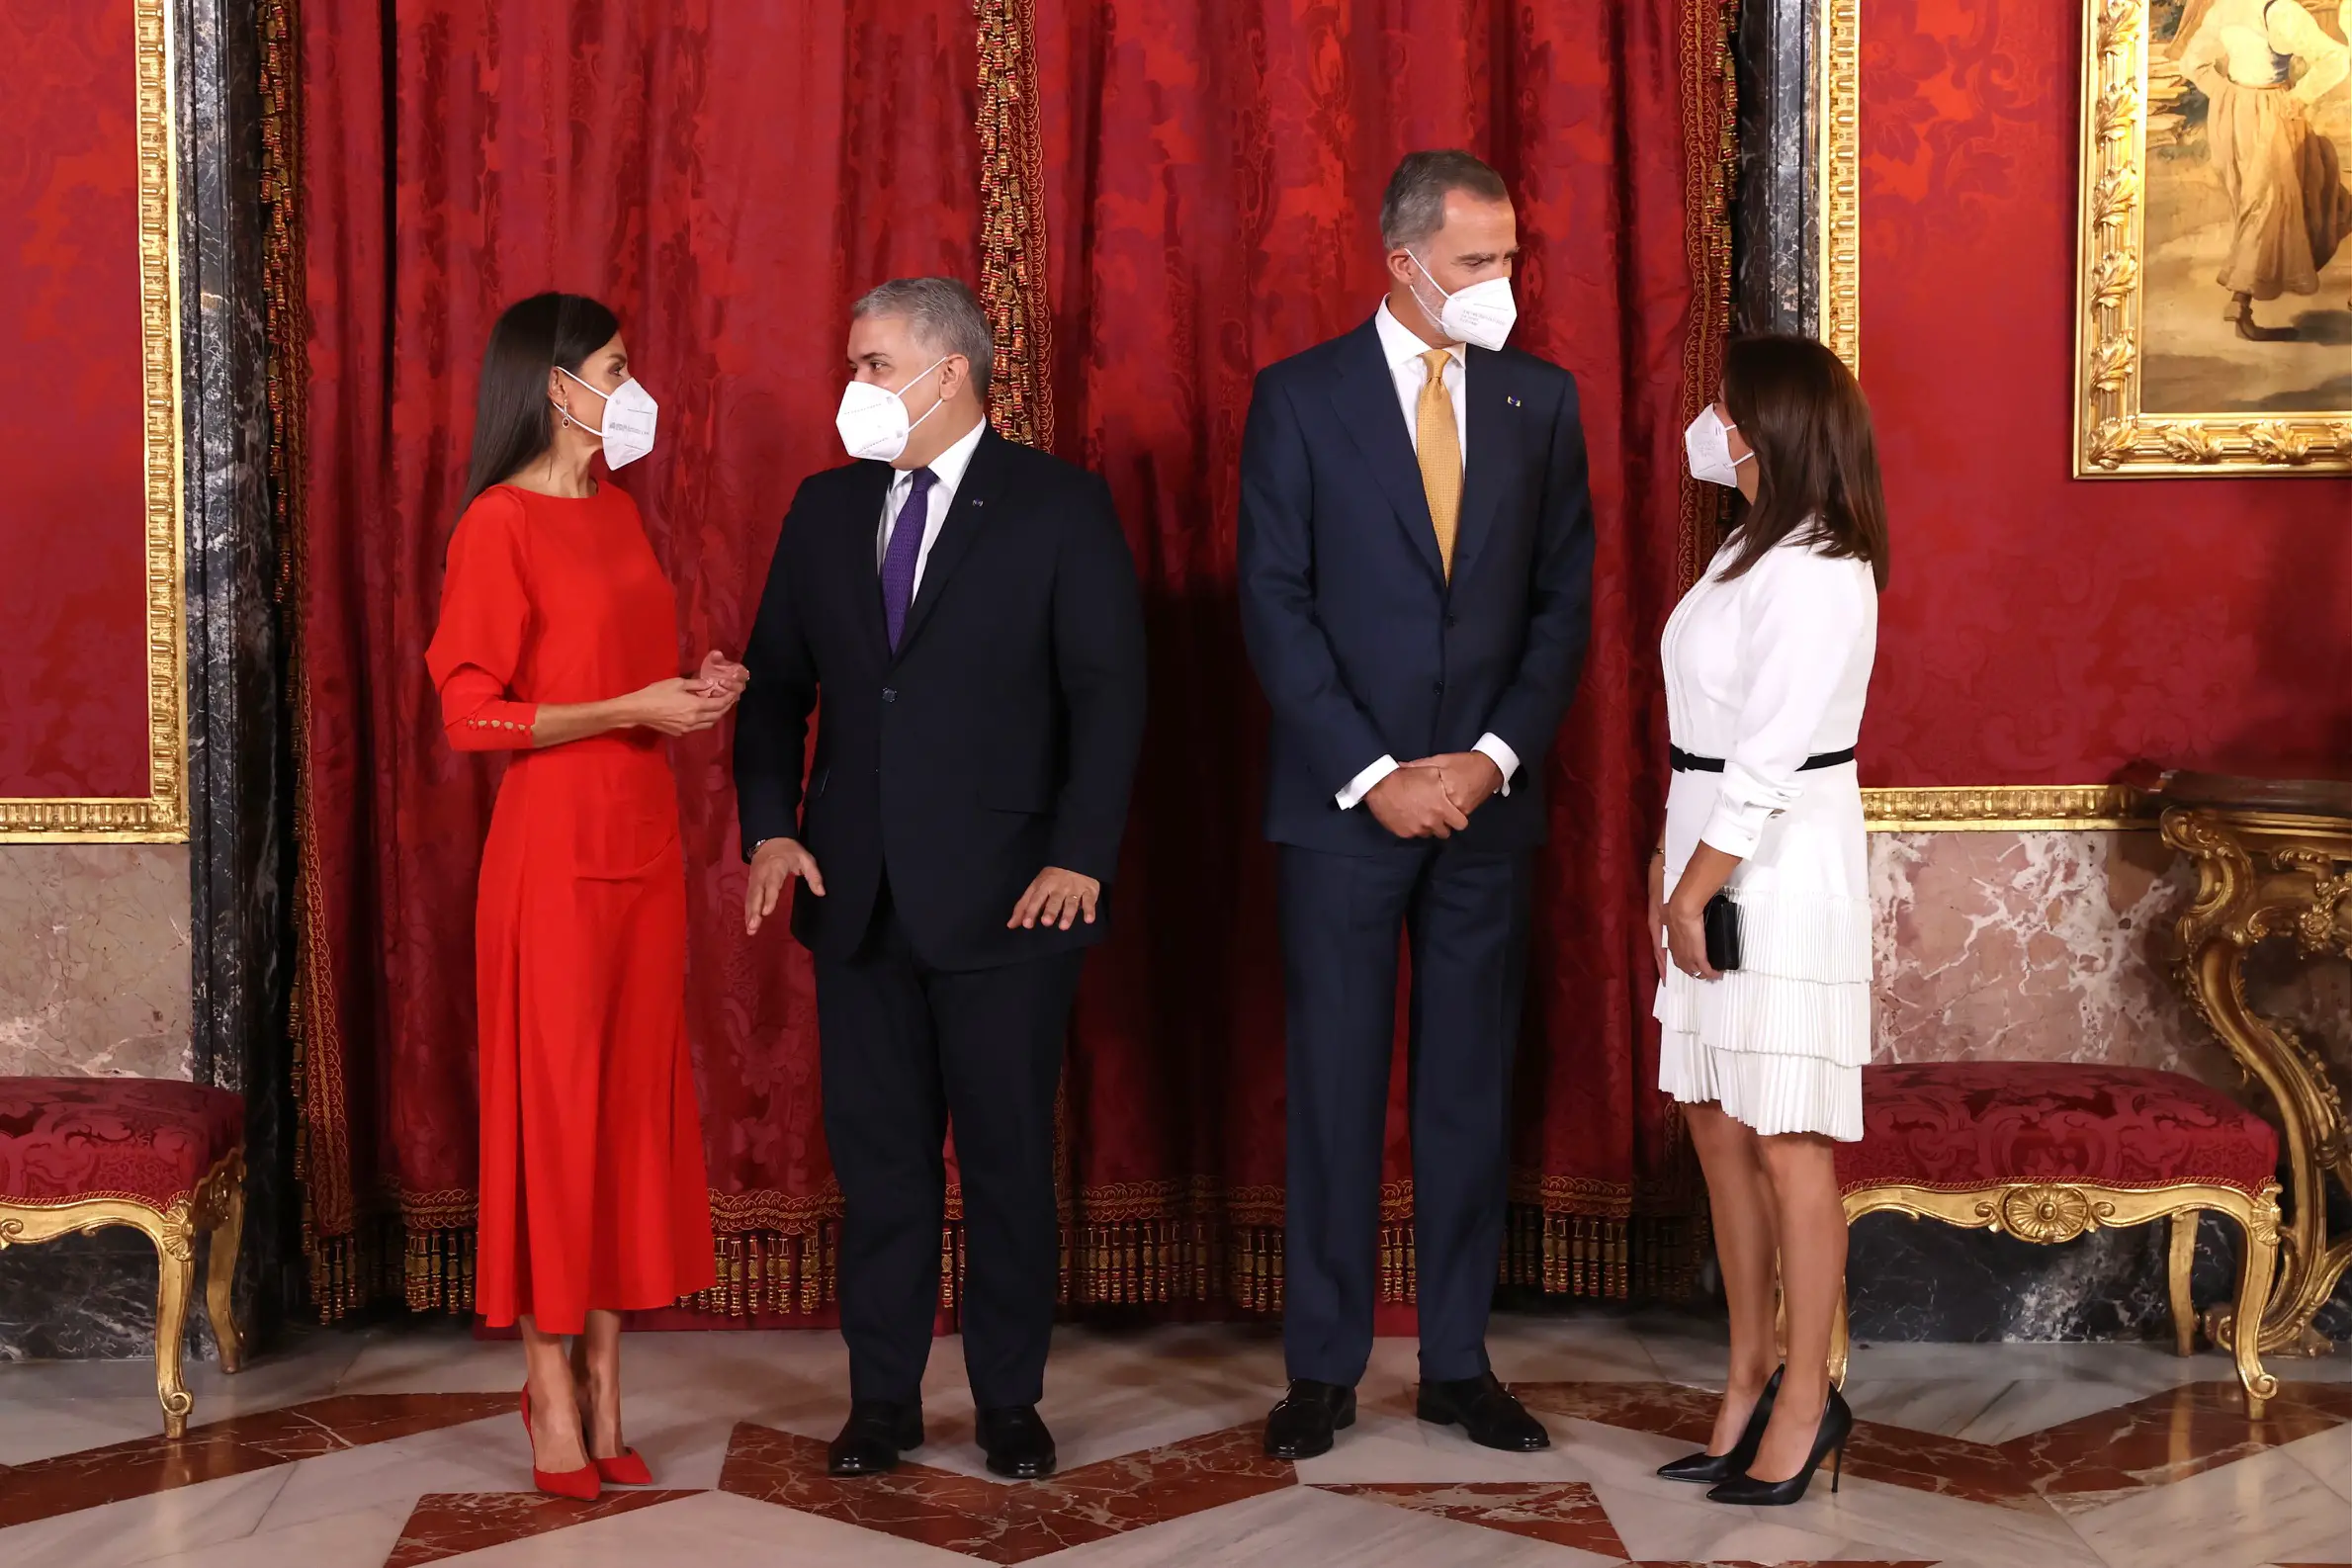 Queen Letizia in Red for Lunch with Columbian President and First Lady